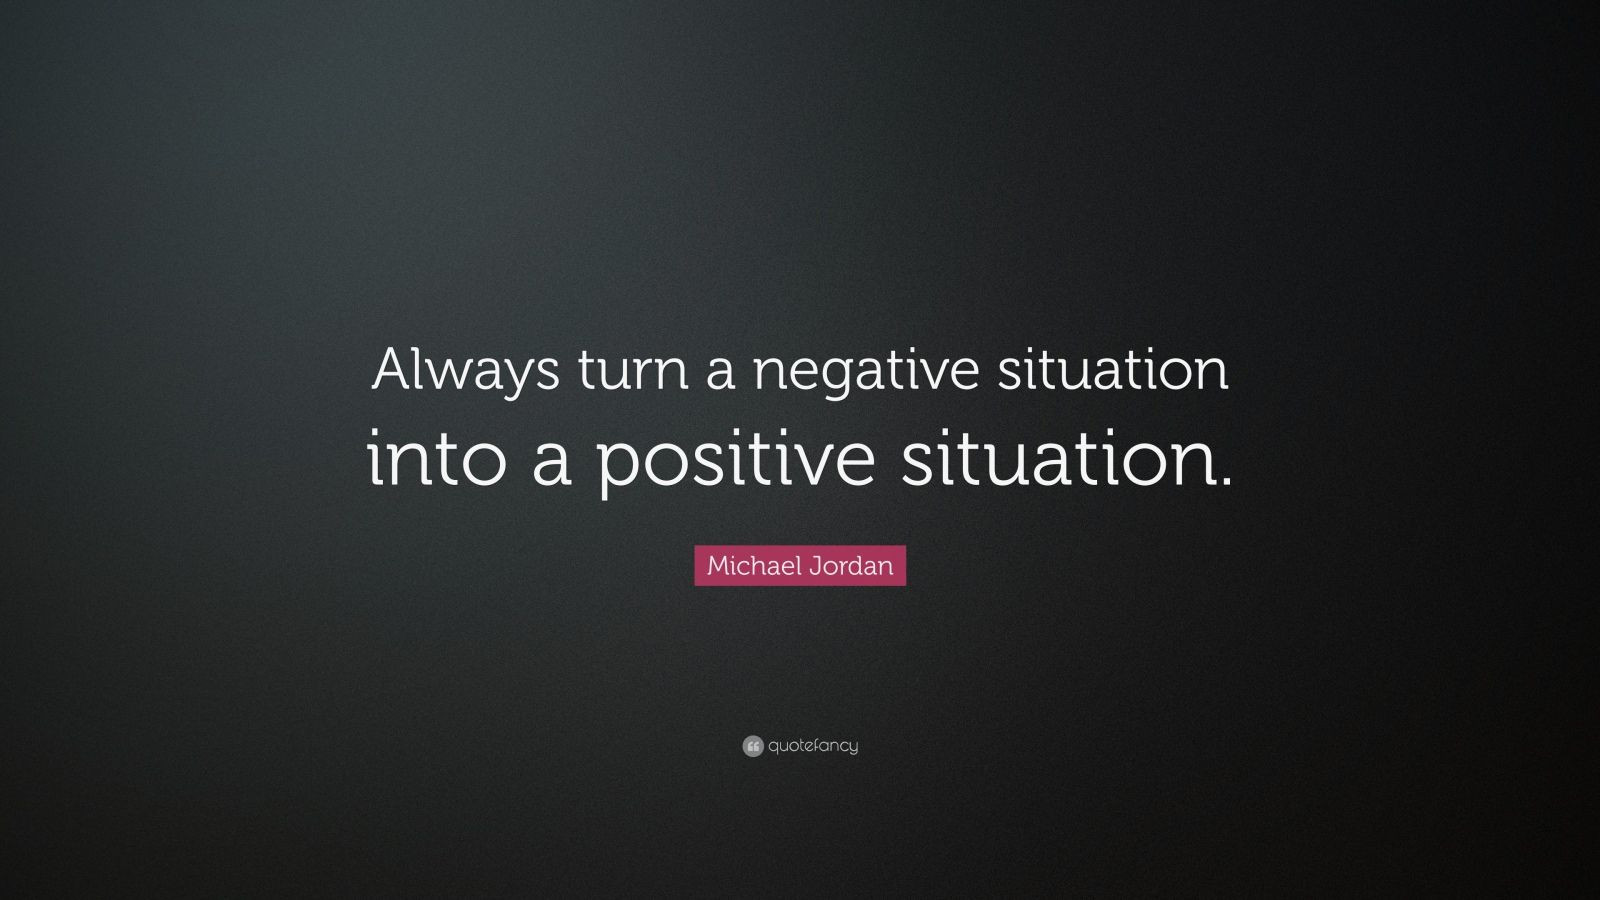 Turning Negatives Into Positives Quotes
 Michael Jordan Quote “Always turn a negative situation